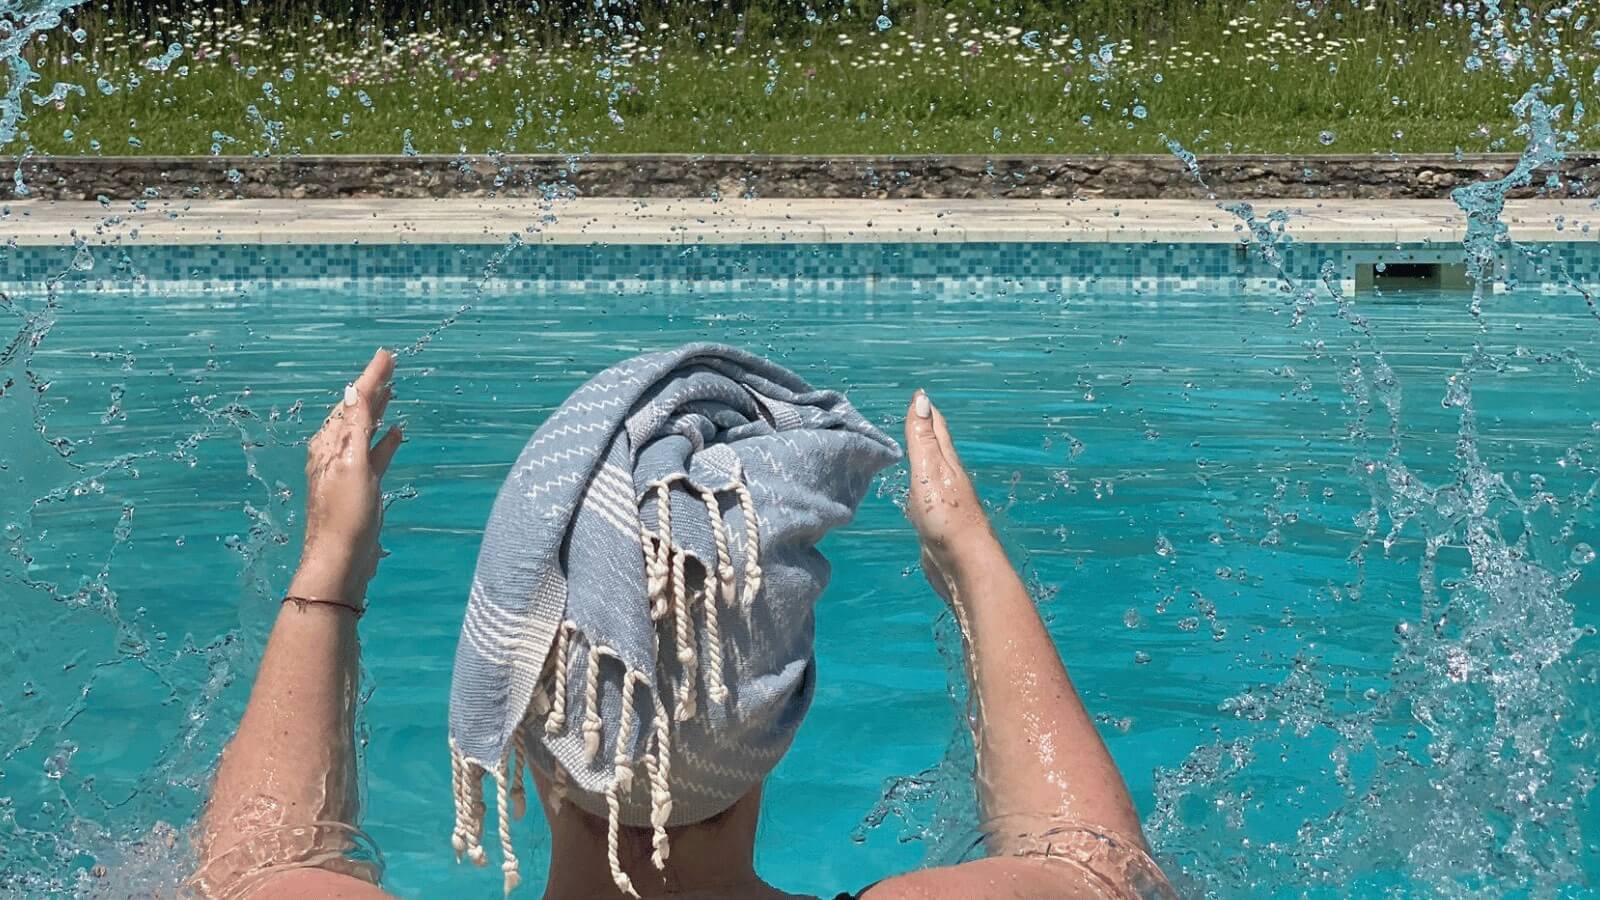 Lady splashes water in swimming pool wearing a pale blue hair towel